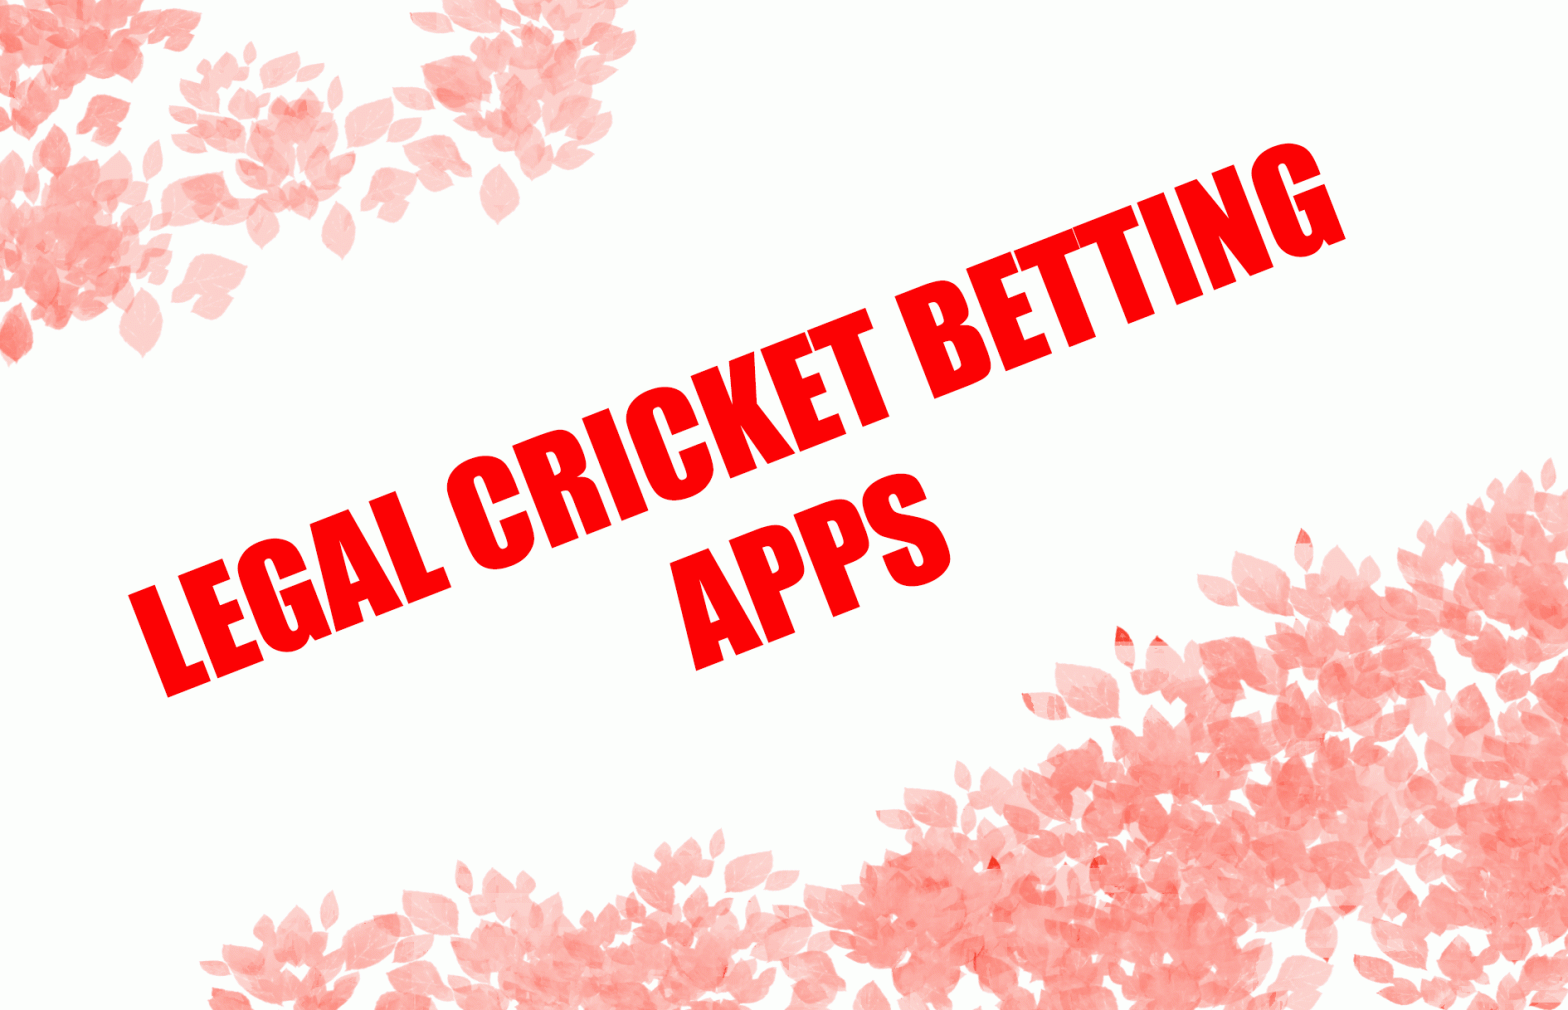 cricket betting services